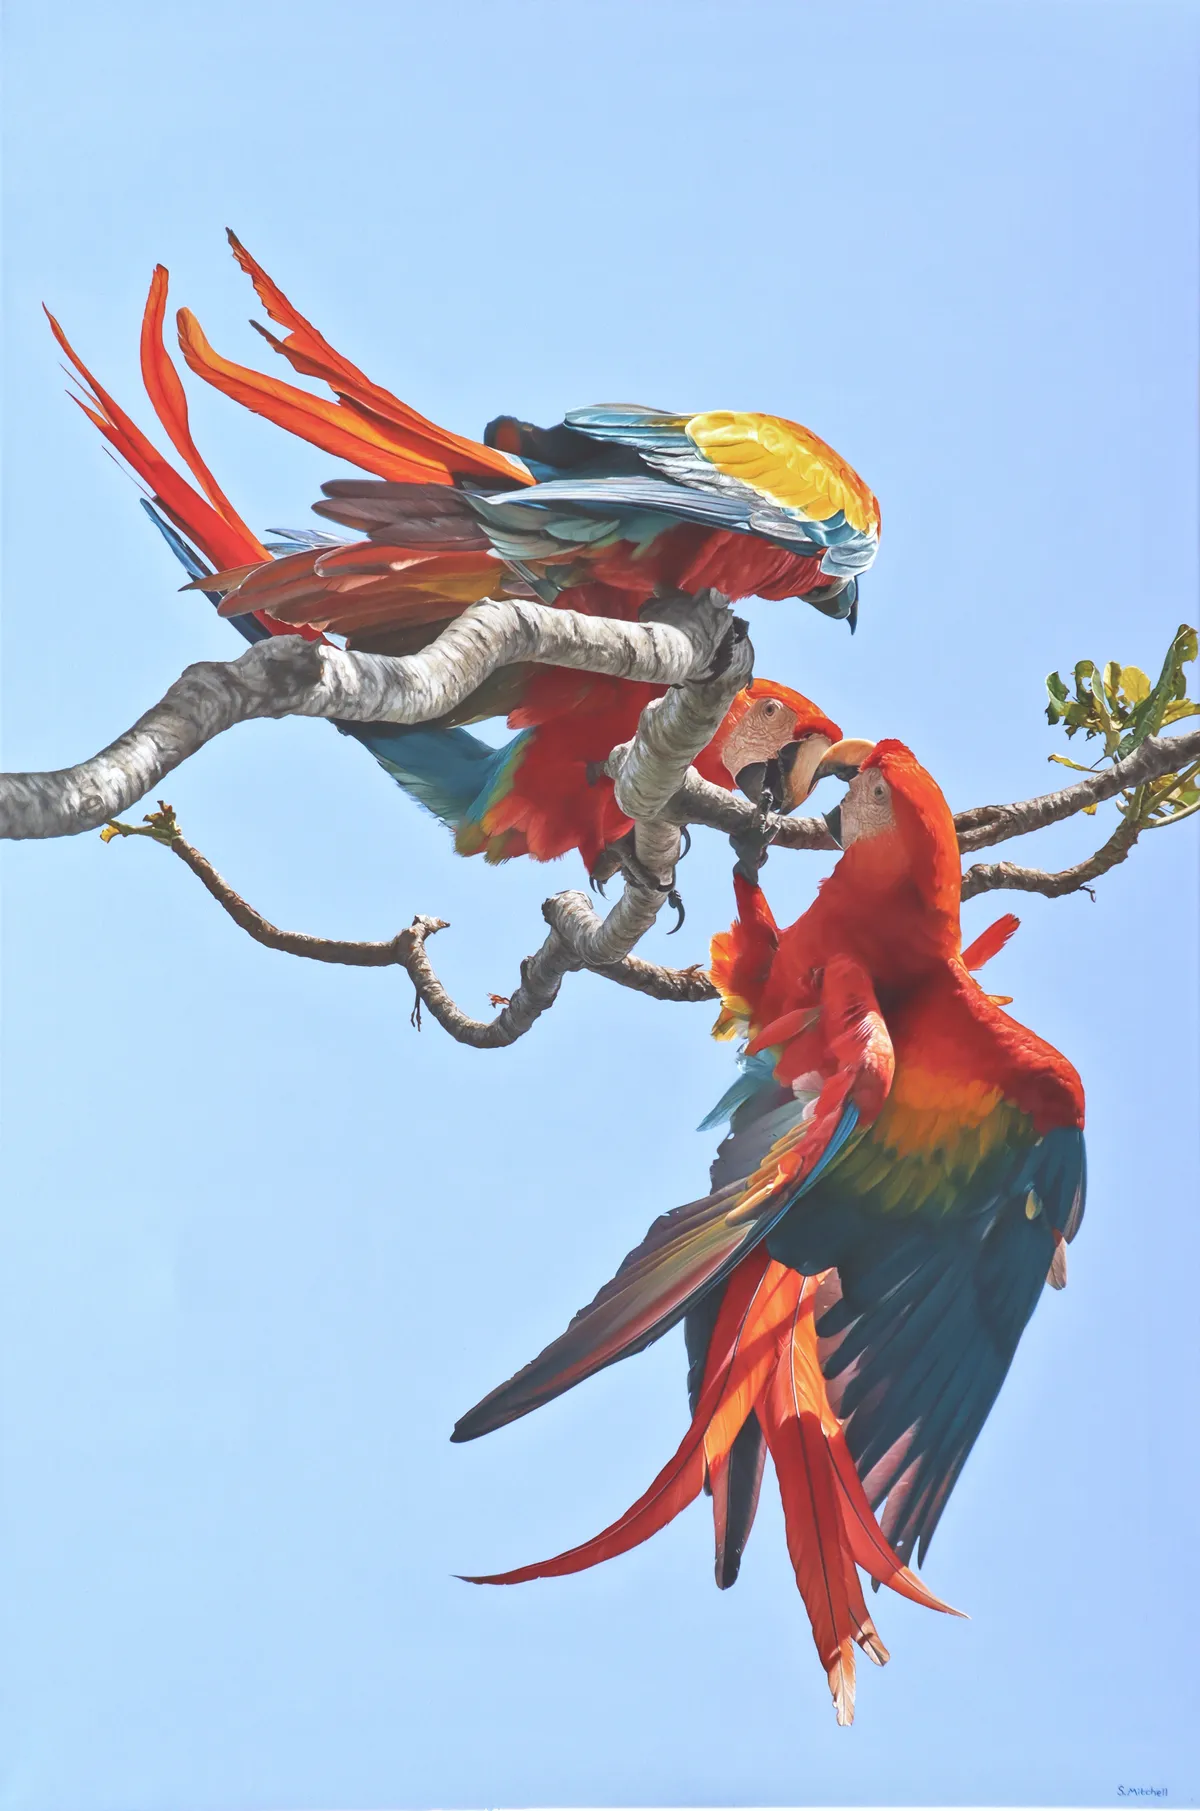 Highly Commended: Scarlet Macaw (Ara Macao), by Scott Mitchell.